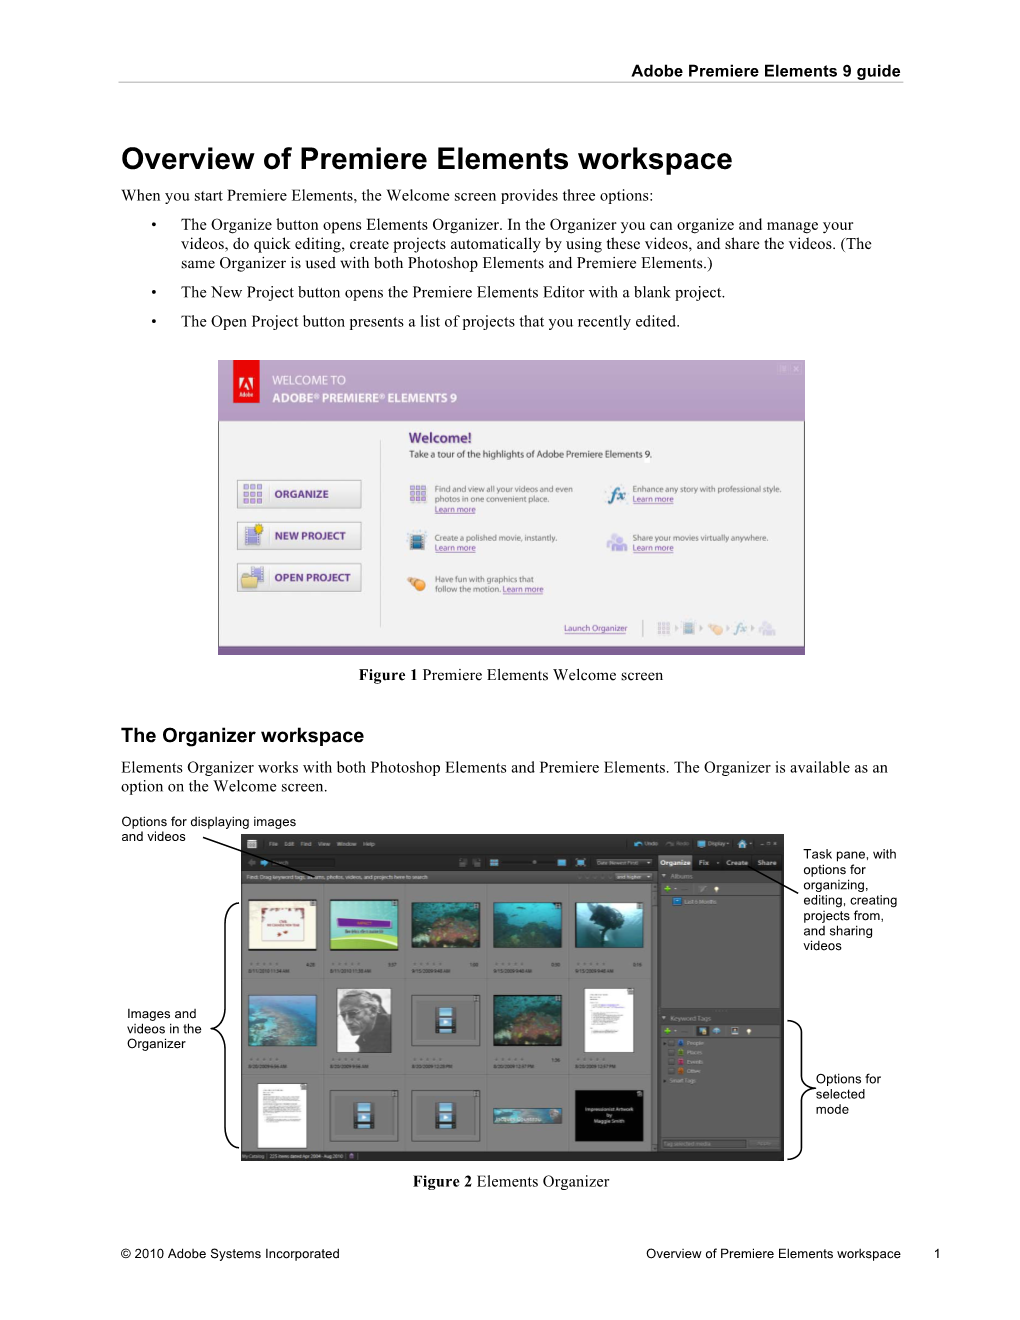 Overview of Premiere Elements Workspace When You Start Premiere Elements, the Welcome Screen Provides Three Options: • the Organize Button Opens Elements Organizer